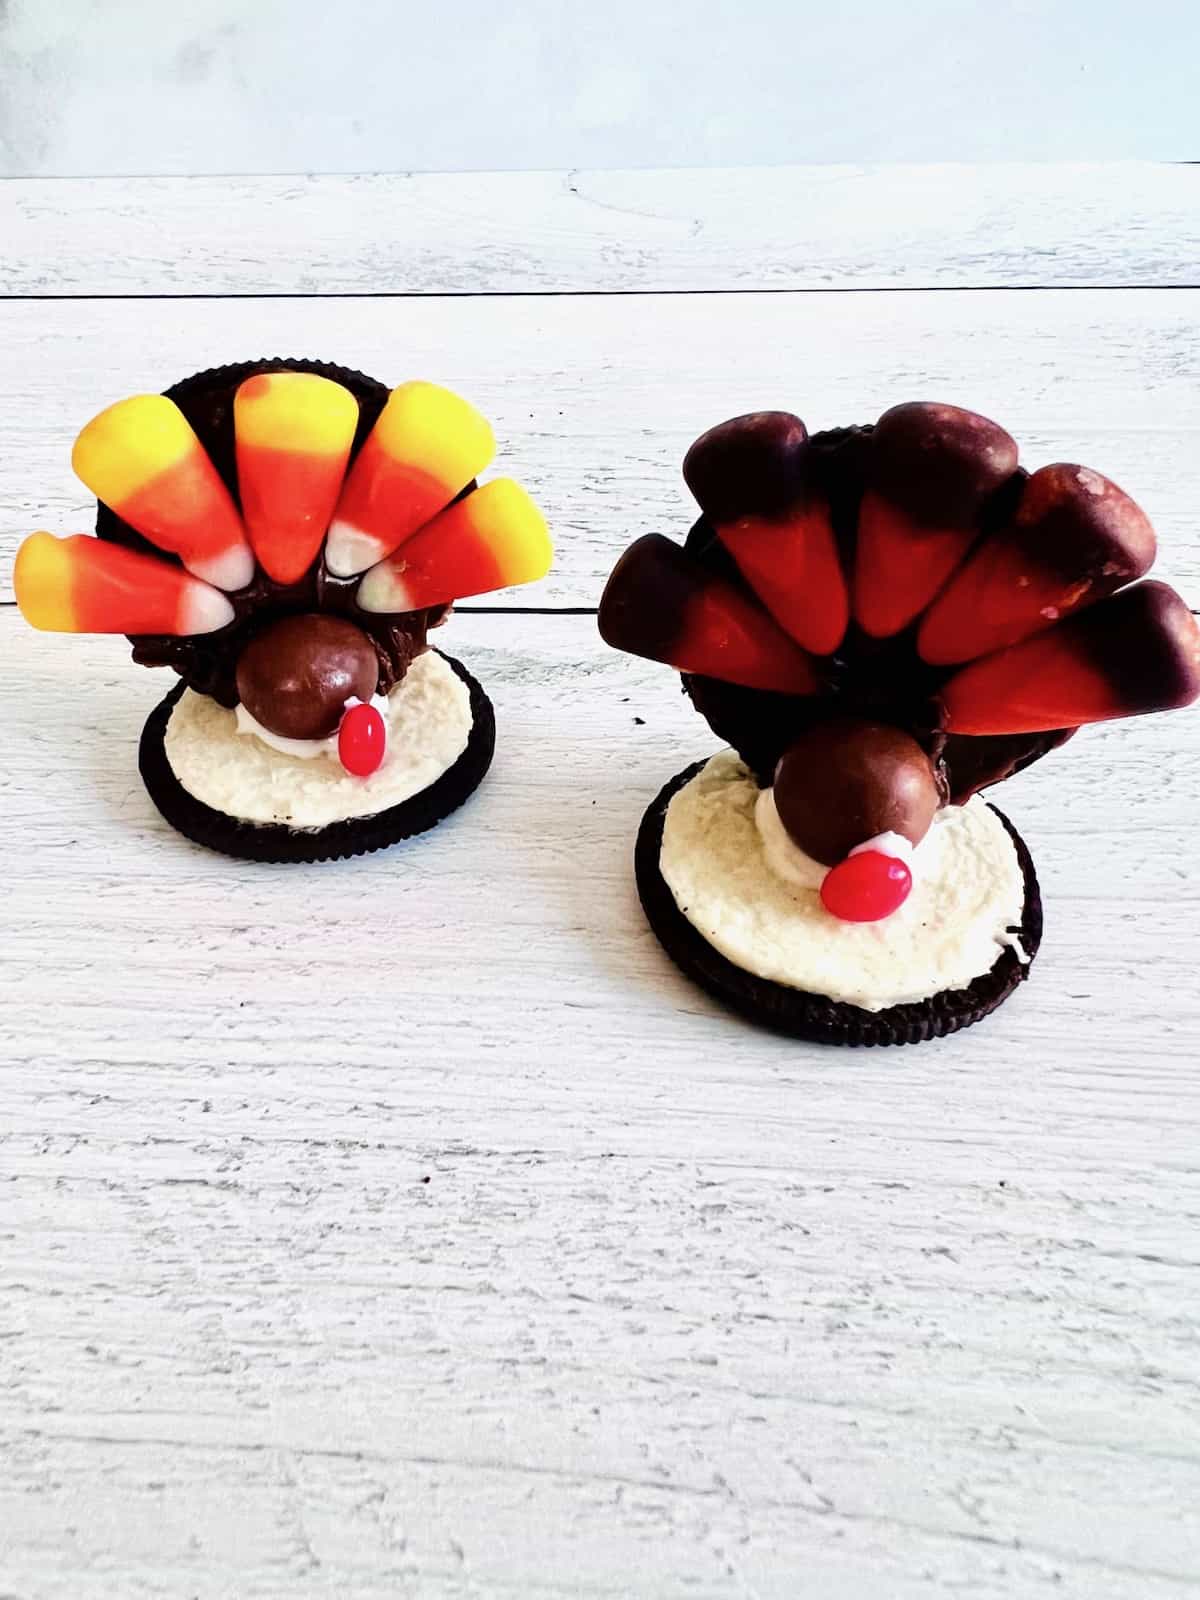 Two Oreo turkeys decorated and ready to display or eat for Thanksgiving.